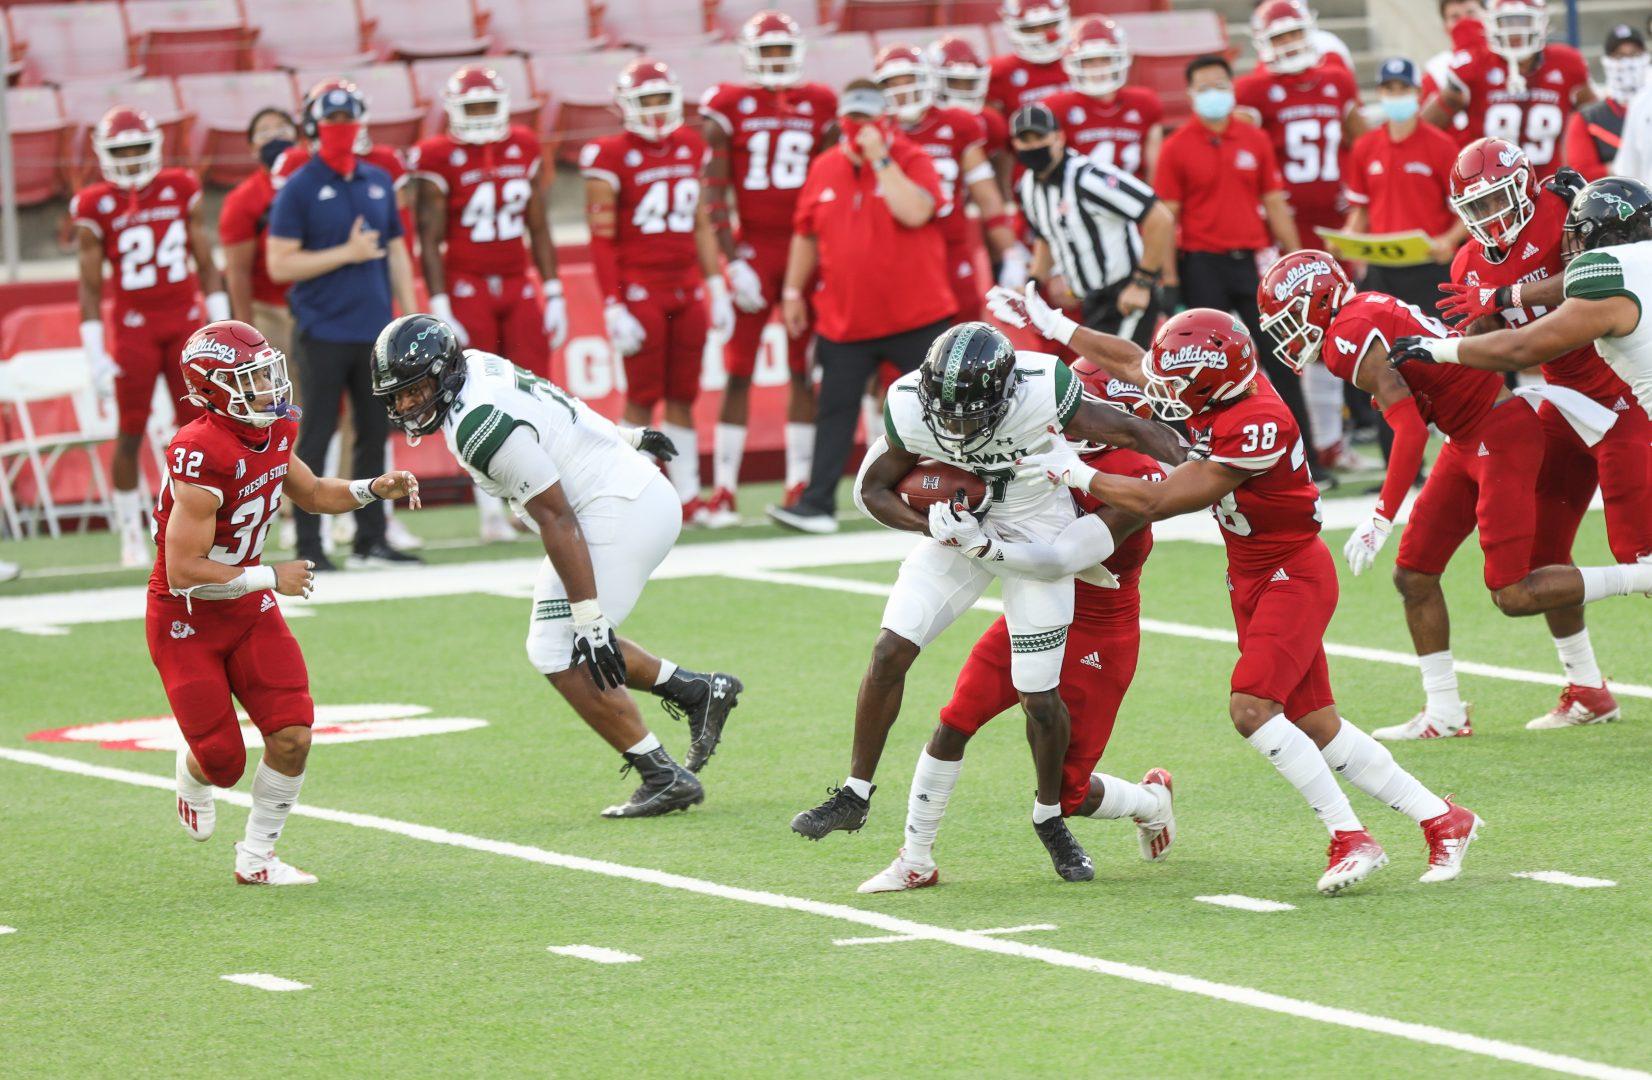 Defensive back Evan Williams (32) goes in for a tackle against Hawaii Rainbow’s running back Miles Reed (4) during the first half of the game on October 24, 2020, at Bulldog Stadium. (Vendila Yang/The Collegian)